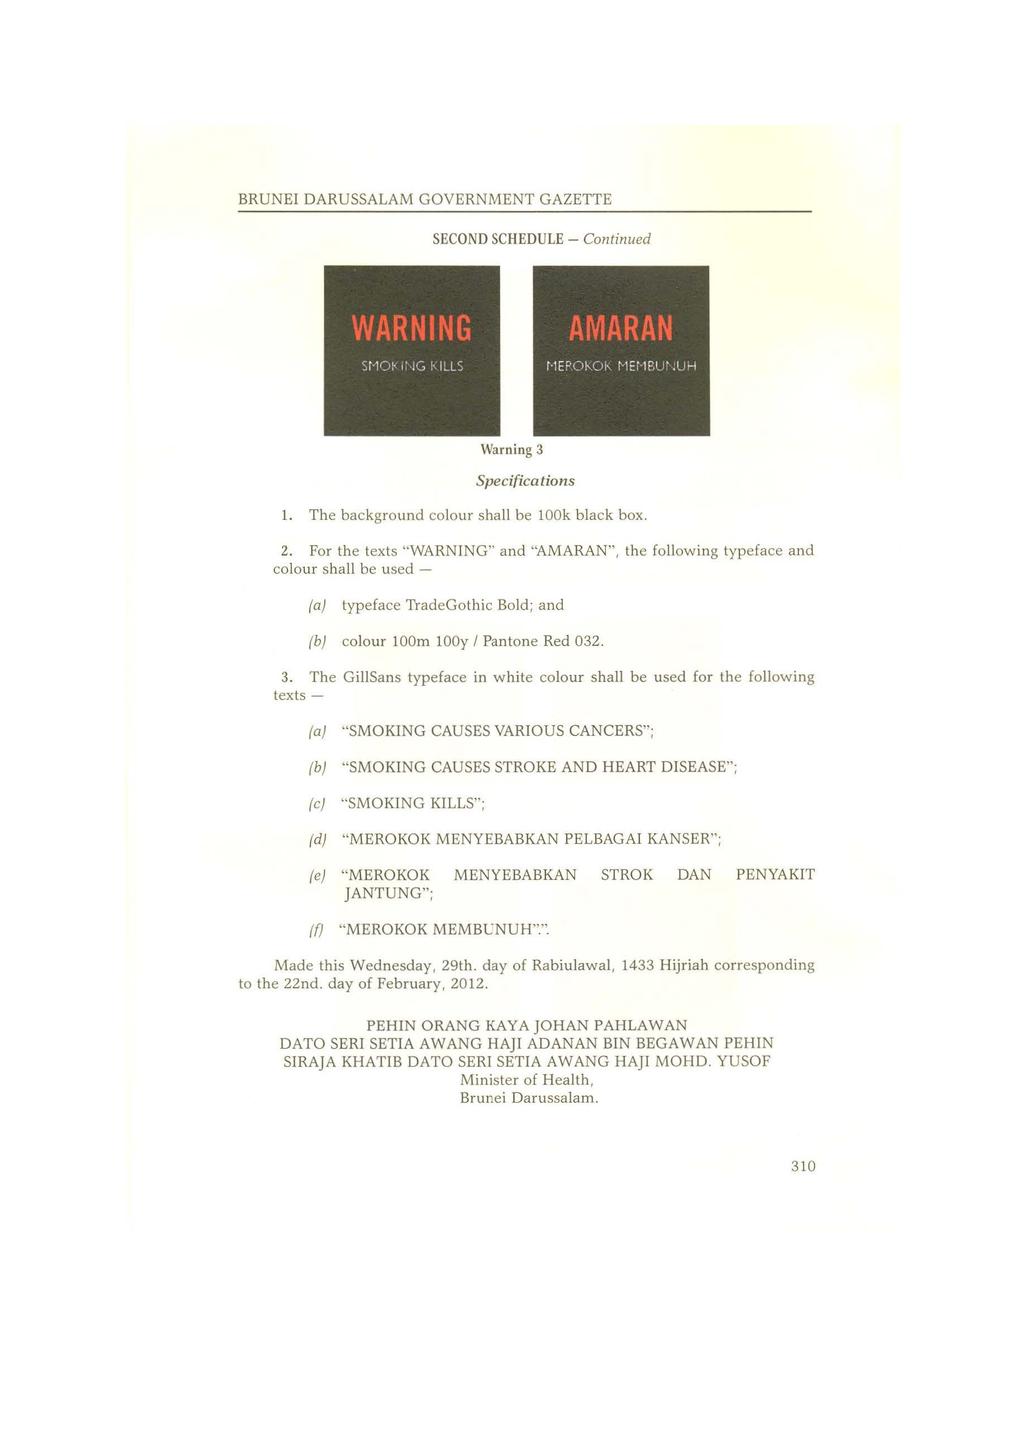 BRUNEI DARUSSALAM GOVERNMENT GAZETTE SECOND SCHEDULE - Continued Warning 3 Specifications l. The background colour shall be look black box. 2.